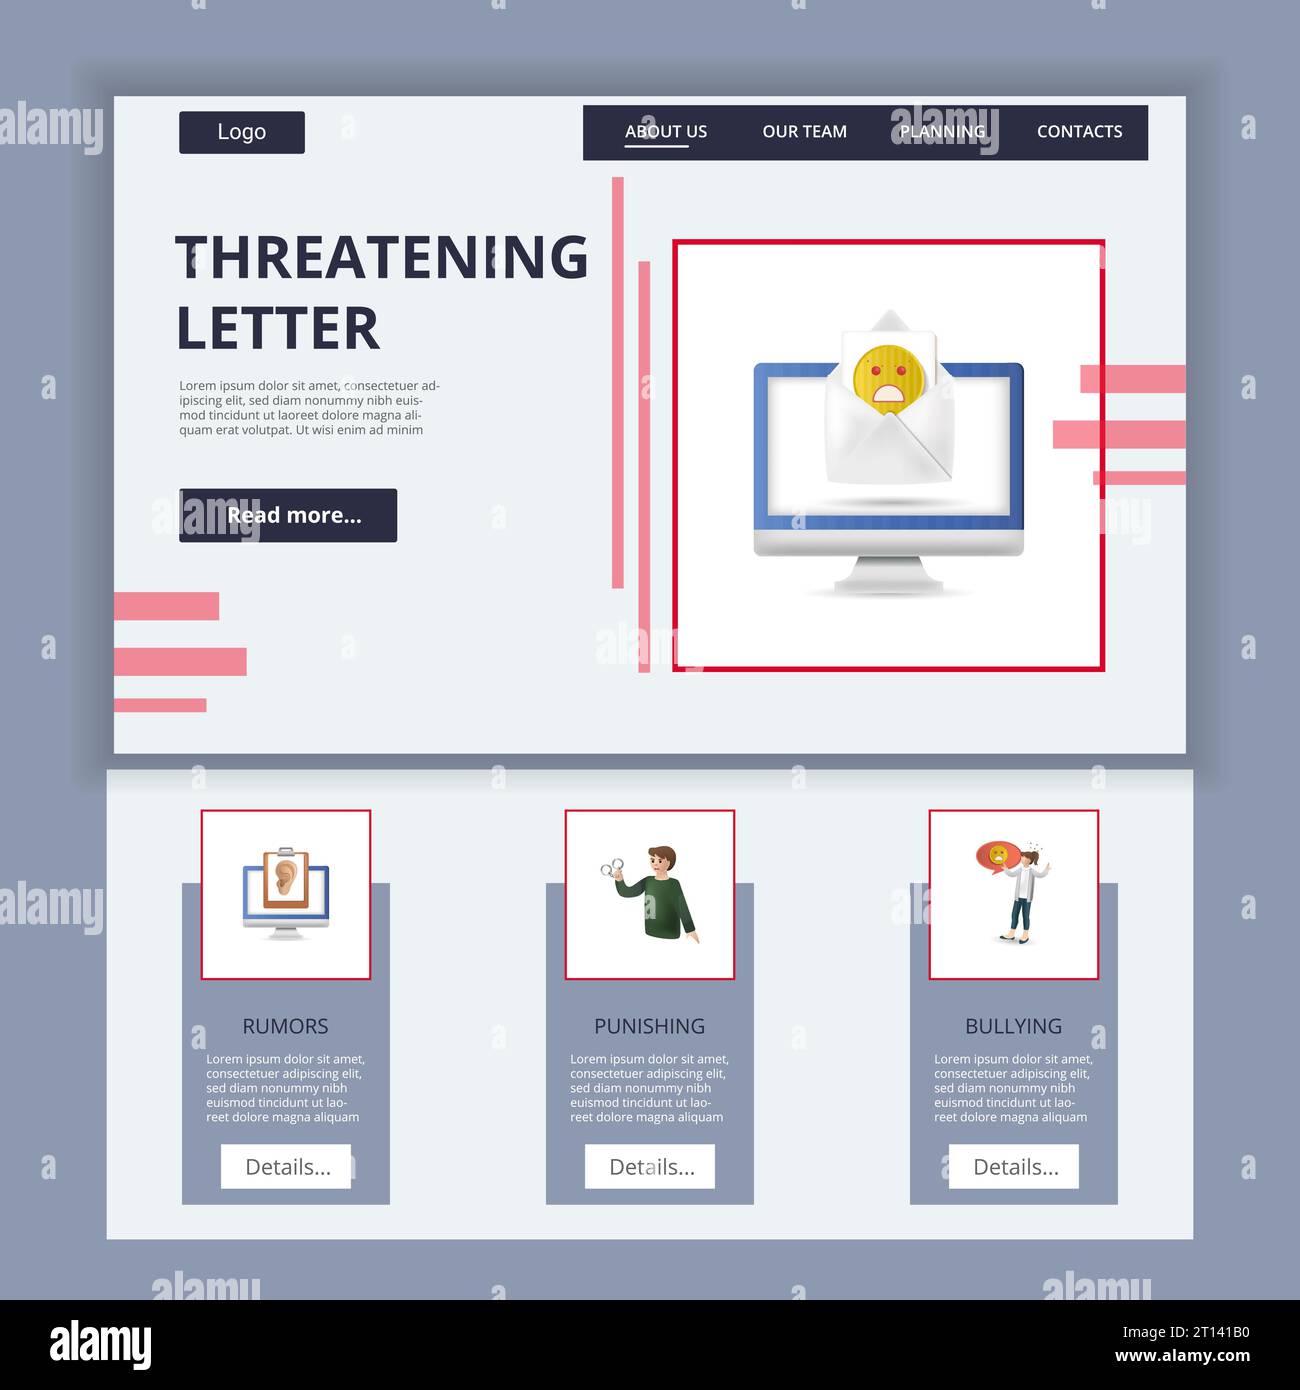 Threatening letter flat landing page website template. Rumors, punishing, bullying. Web banner with header, content and footer. Vector illustration. Stock Vector